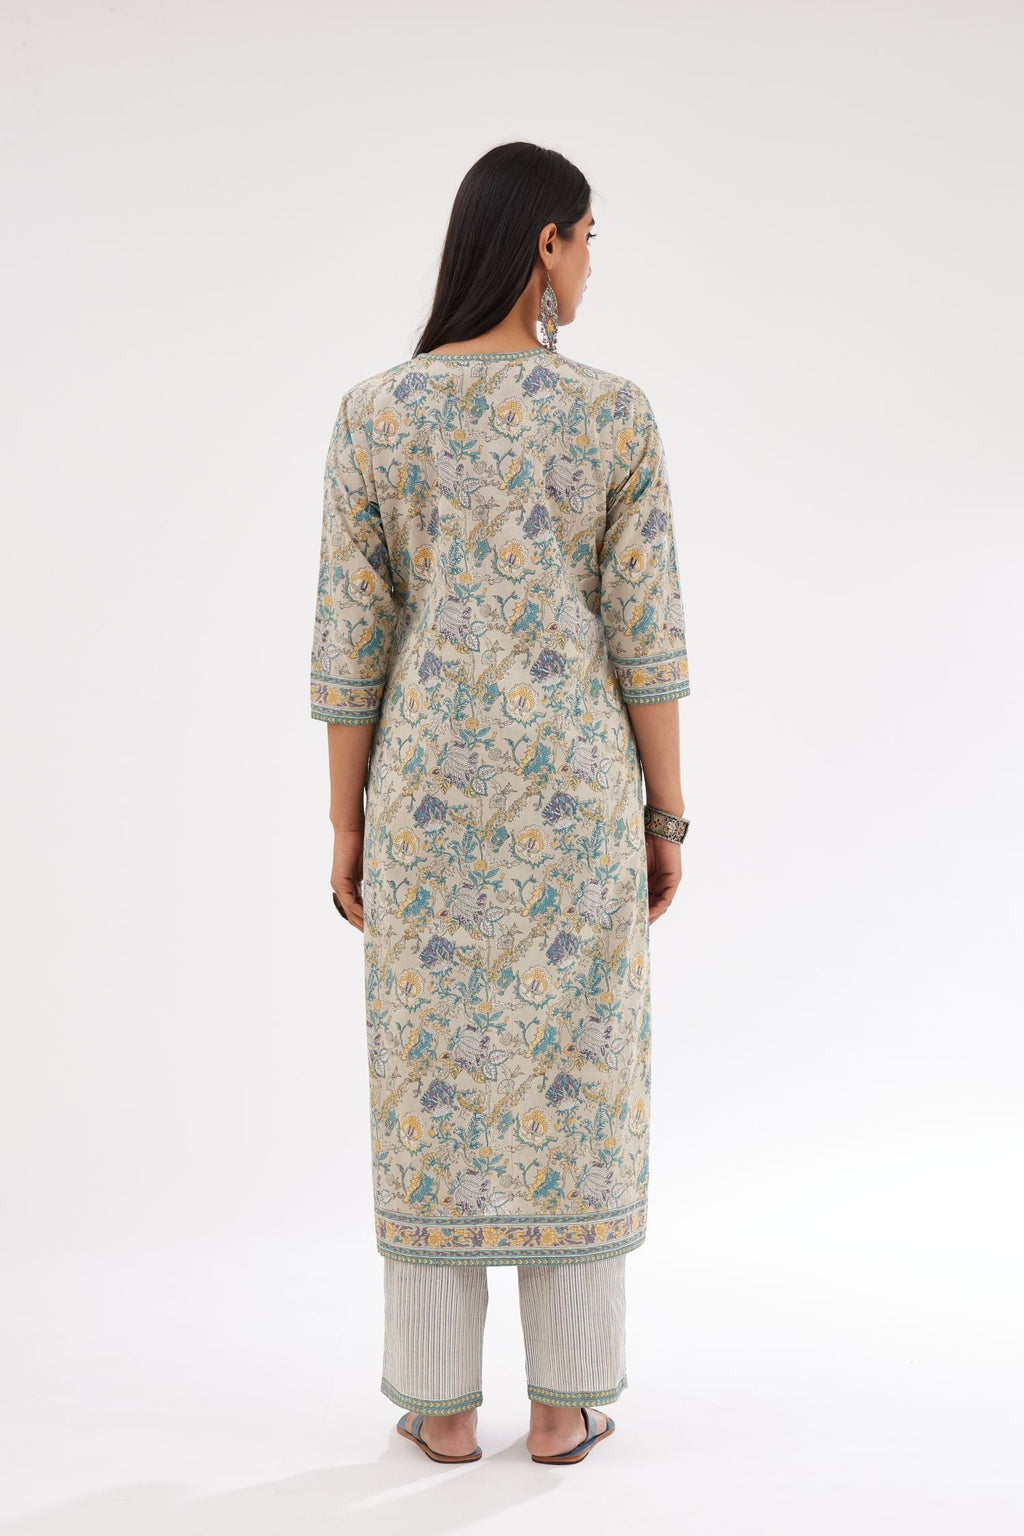 Grey and blue straight kurta with all-over chintz block print & side slits.